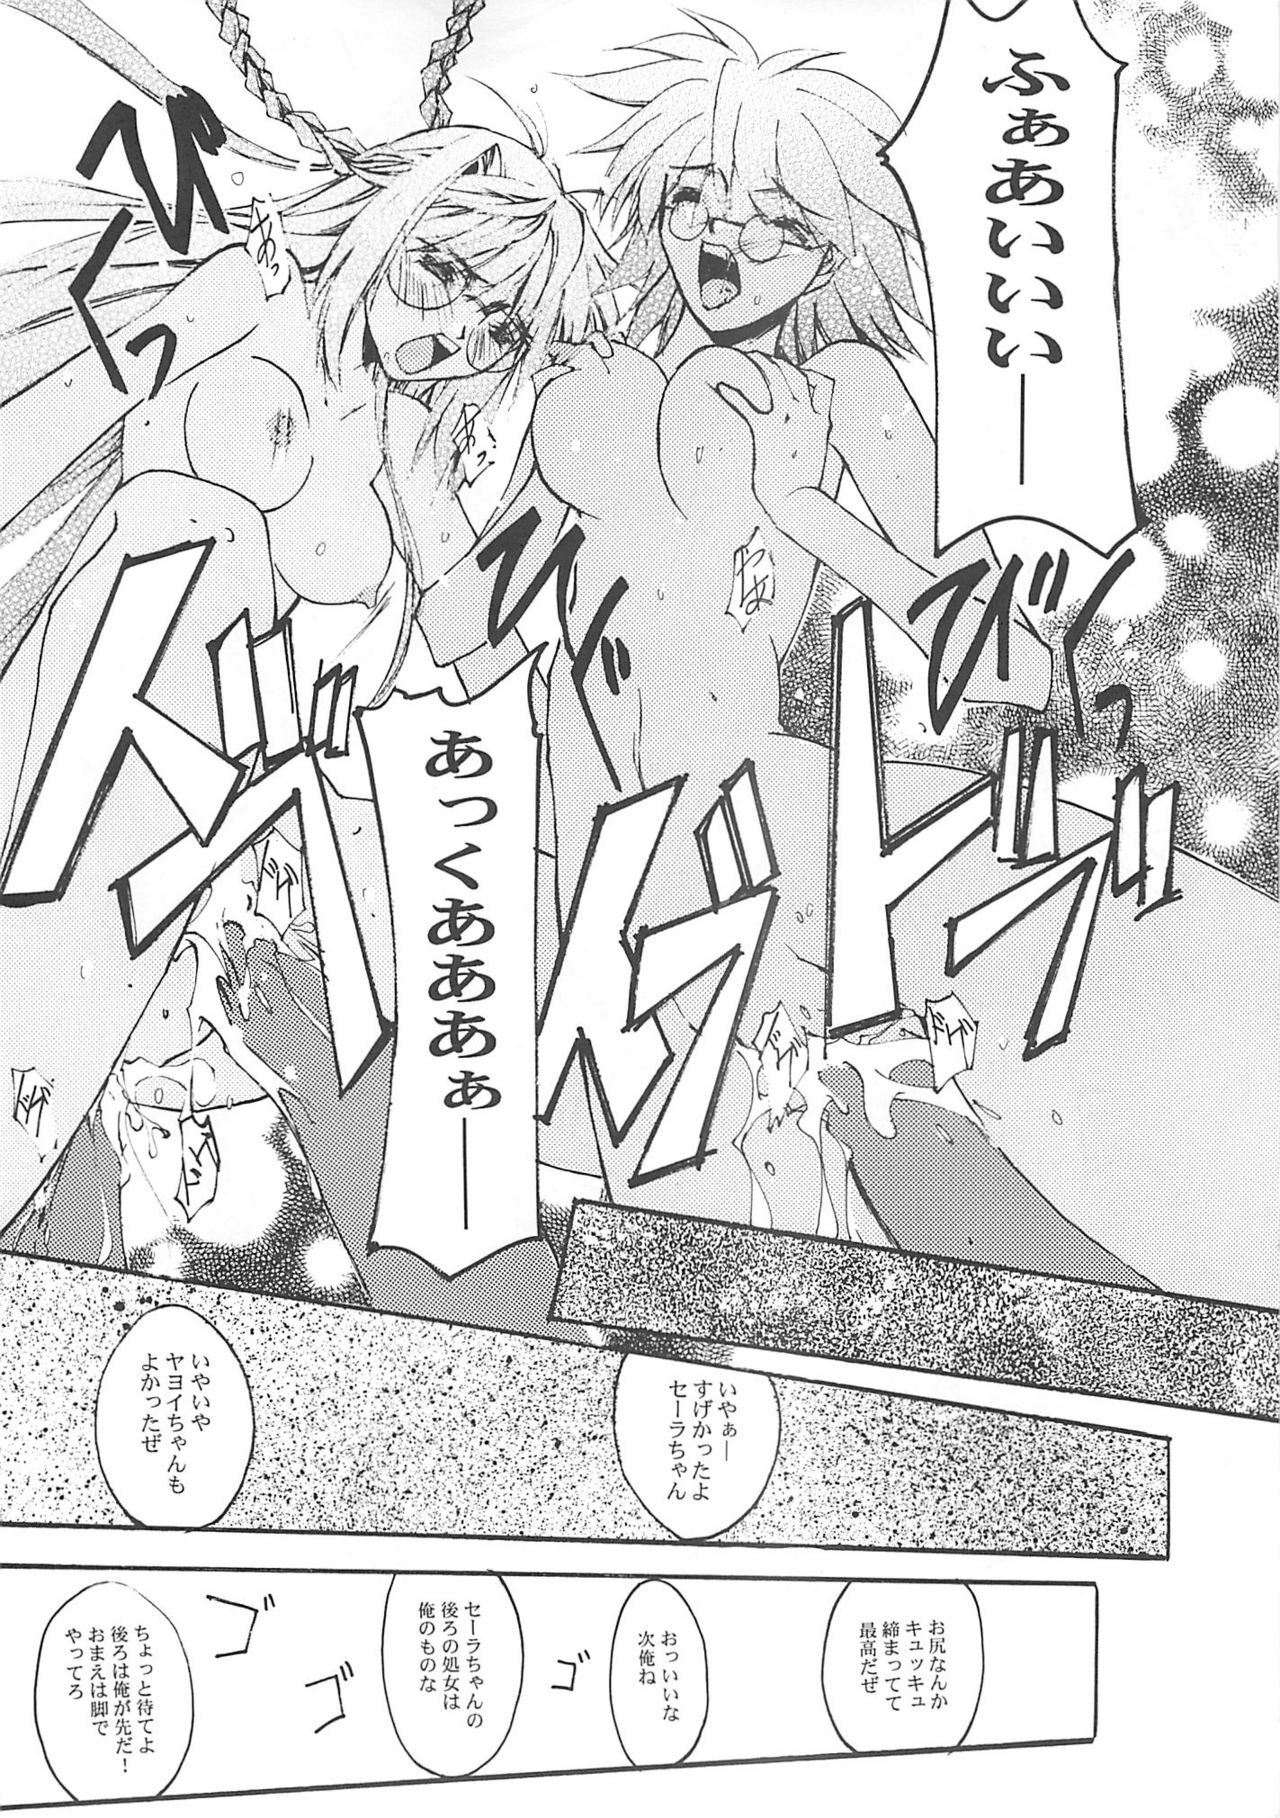 [RYU-SEKI-DO (Nagare Hyo-go)] Cut Glass (G-on Riders, Hoshi no Koe: The Voices of a Distant Star) page 17 full